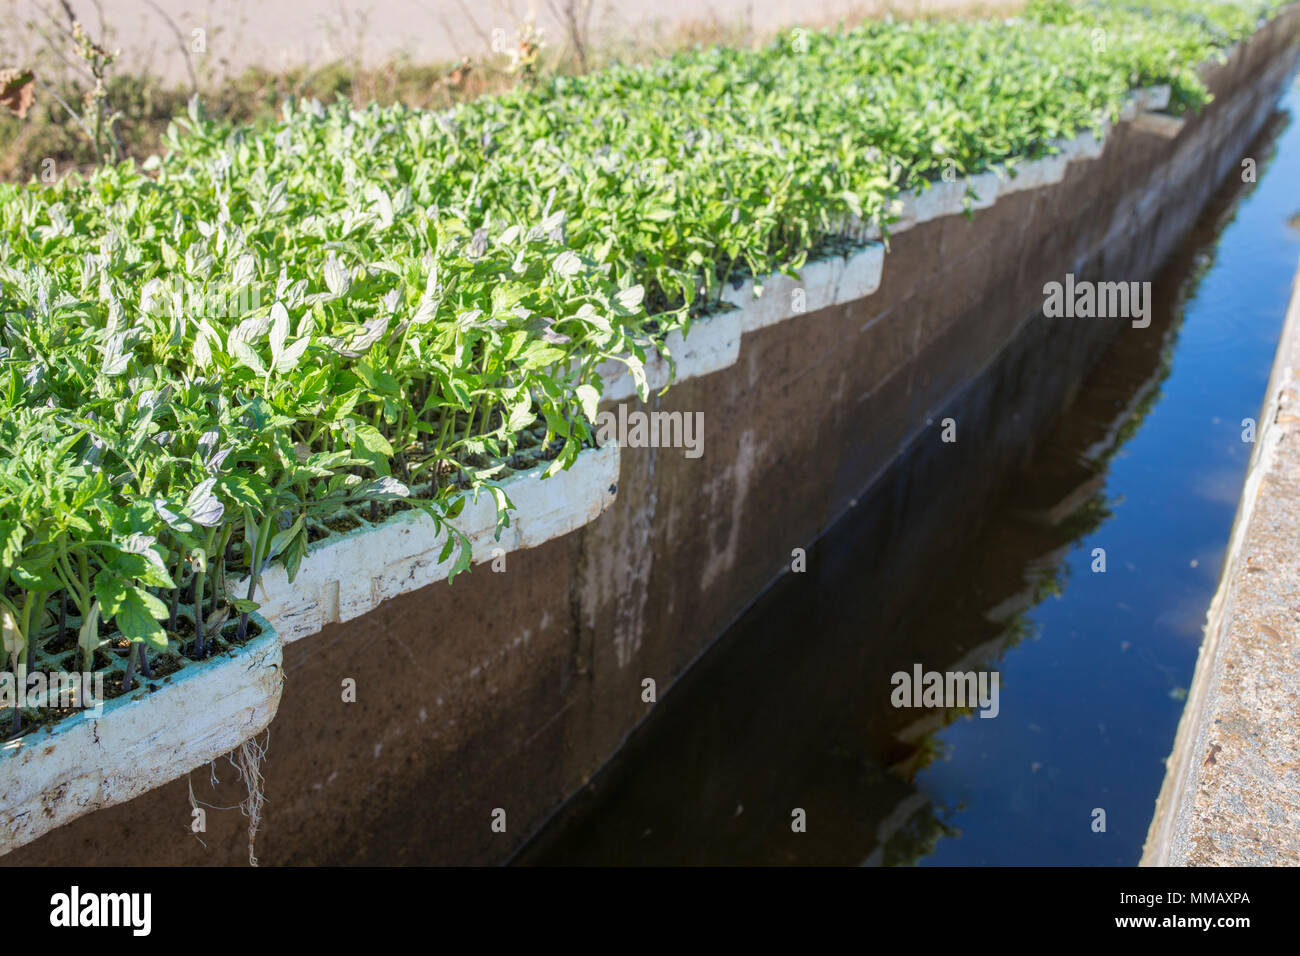 Trays with tomato seedlings dripping at irrigation canal. Tomato planting process from greenhouse to farmland Stock Photo